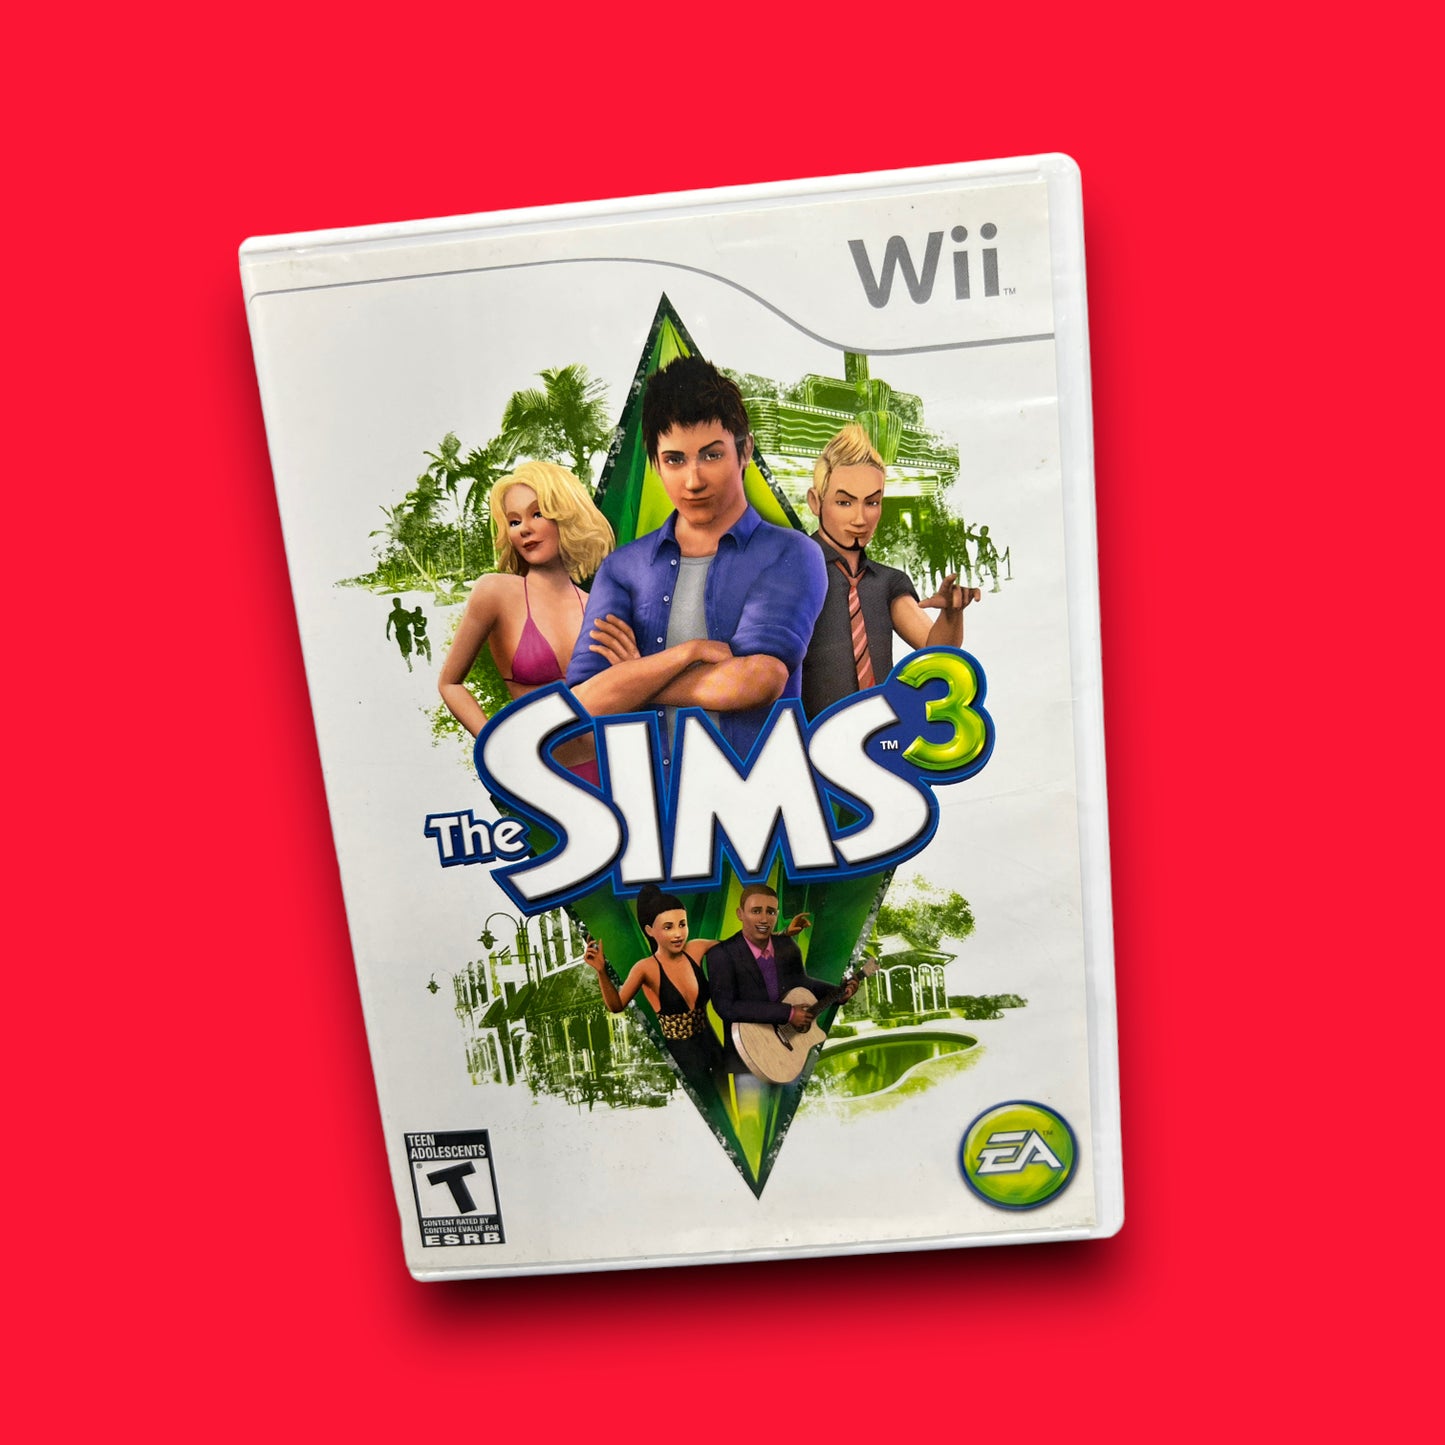 The Sims 3 (Nintendo Wii, 2010)